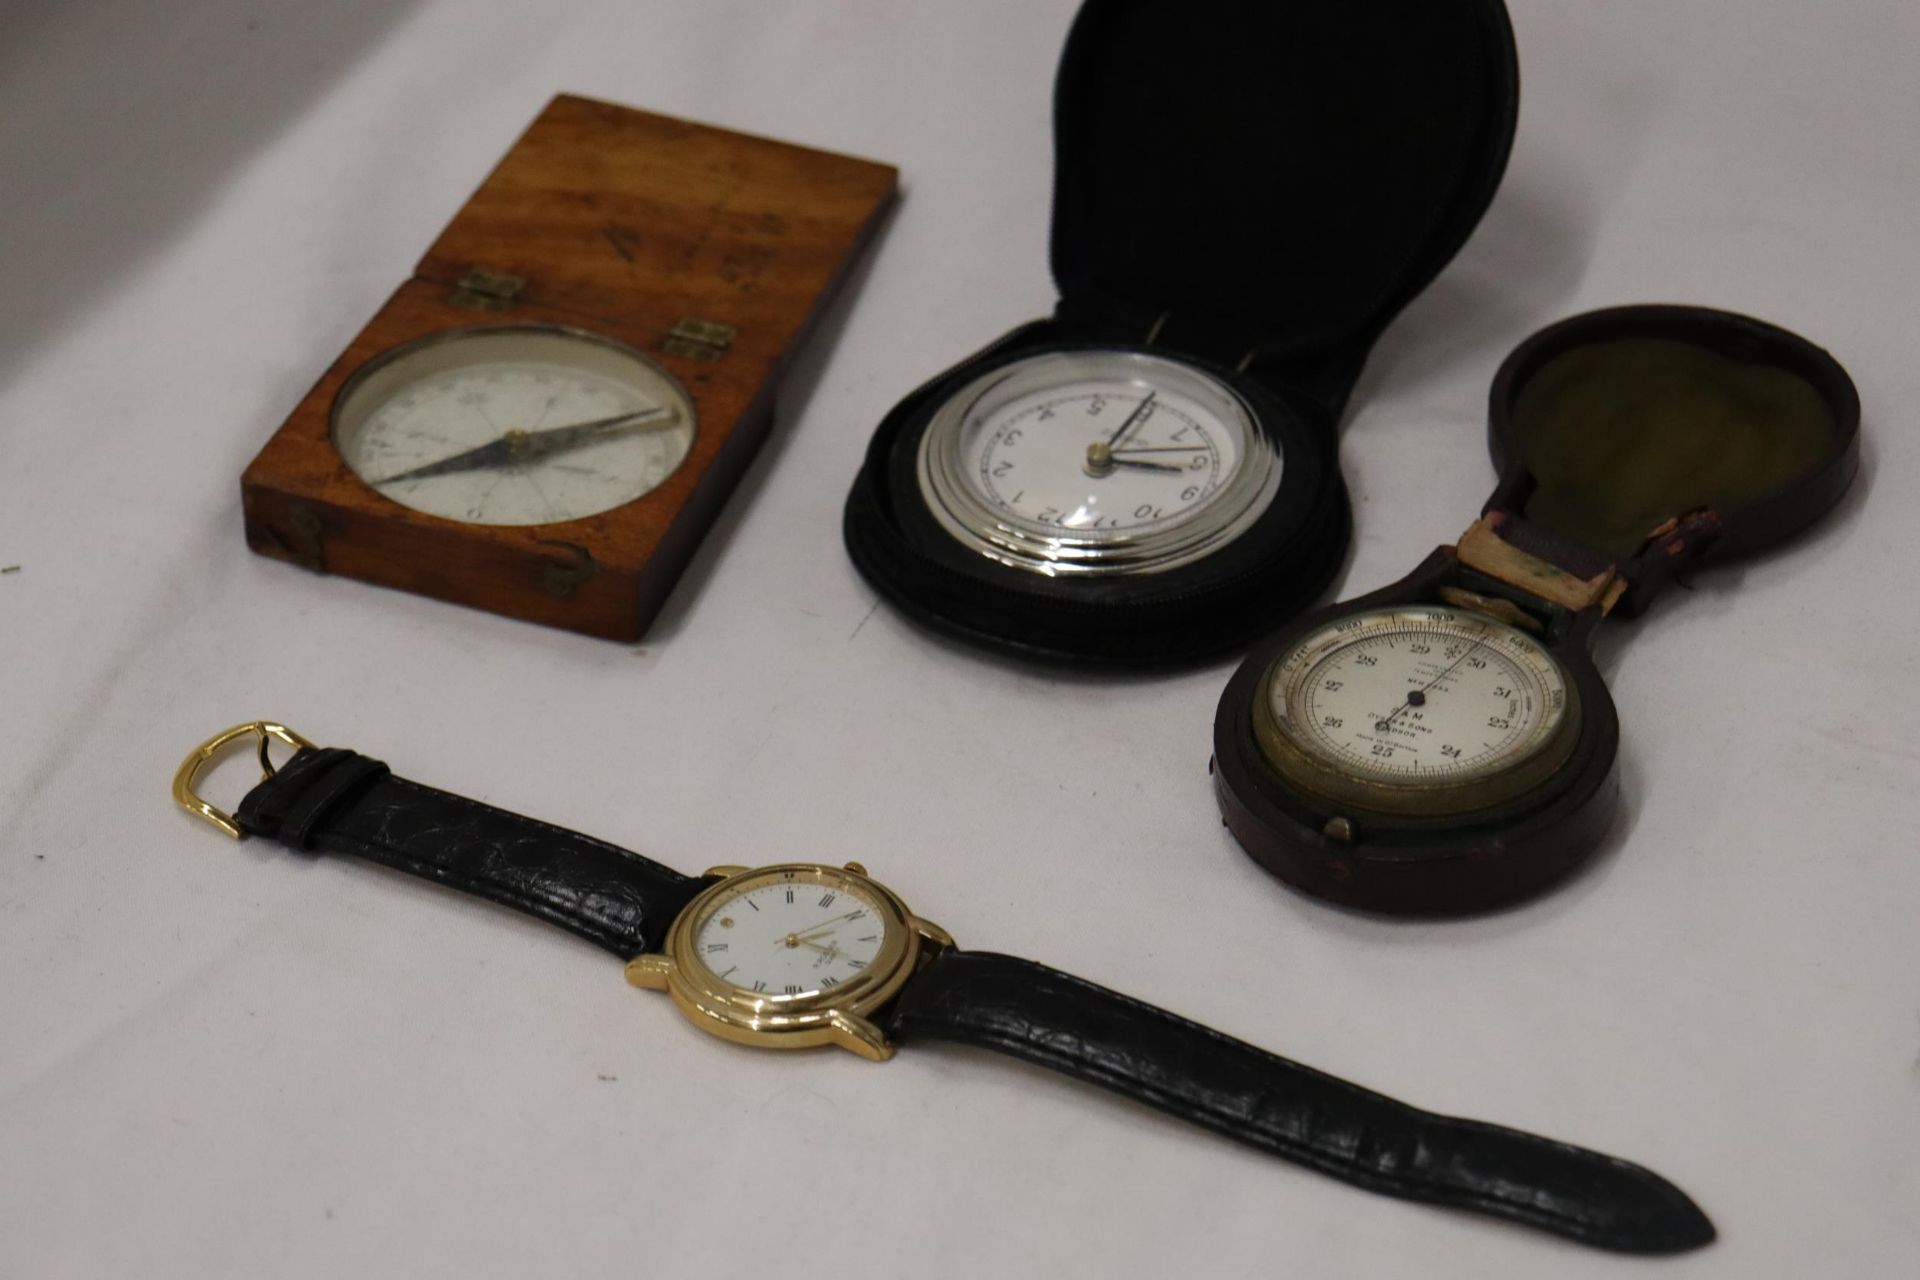 A VINTAGE COMPASS IN AN OAK CASE, A COMPENSATED FOR TEMPERATURE INSTUMENT, MADE BY S & M, DYSON & - Image 6 of 7